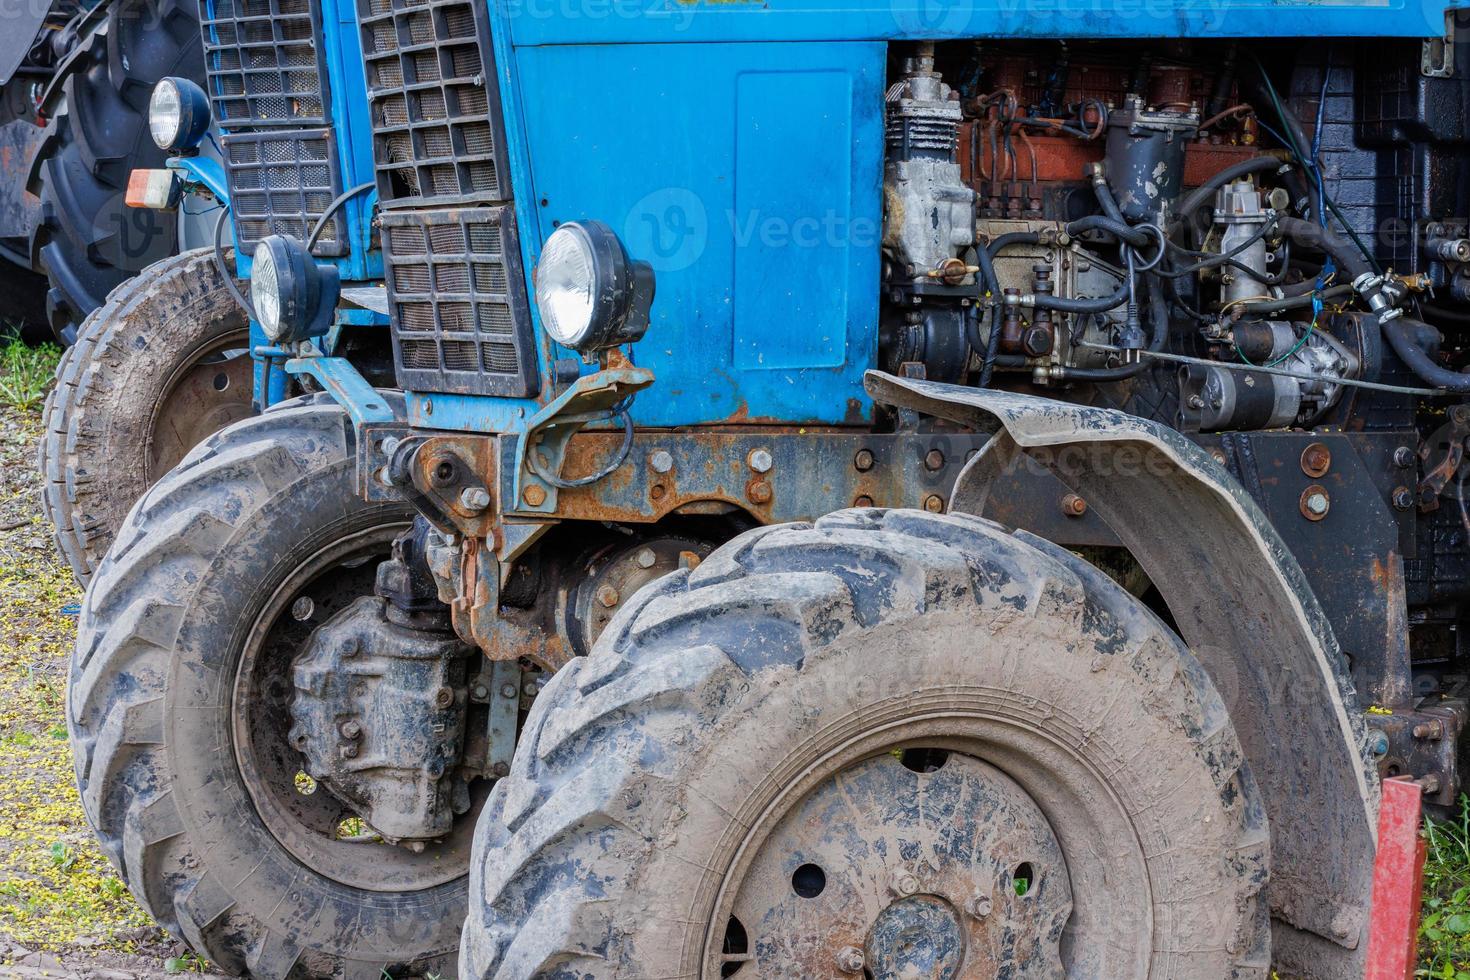 blue belarussian tractors, wheels and opened diesel engine compartments view photo